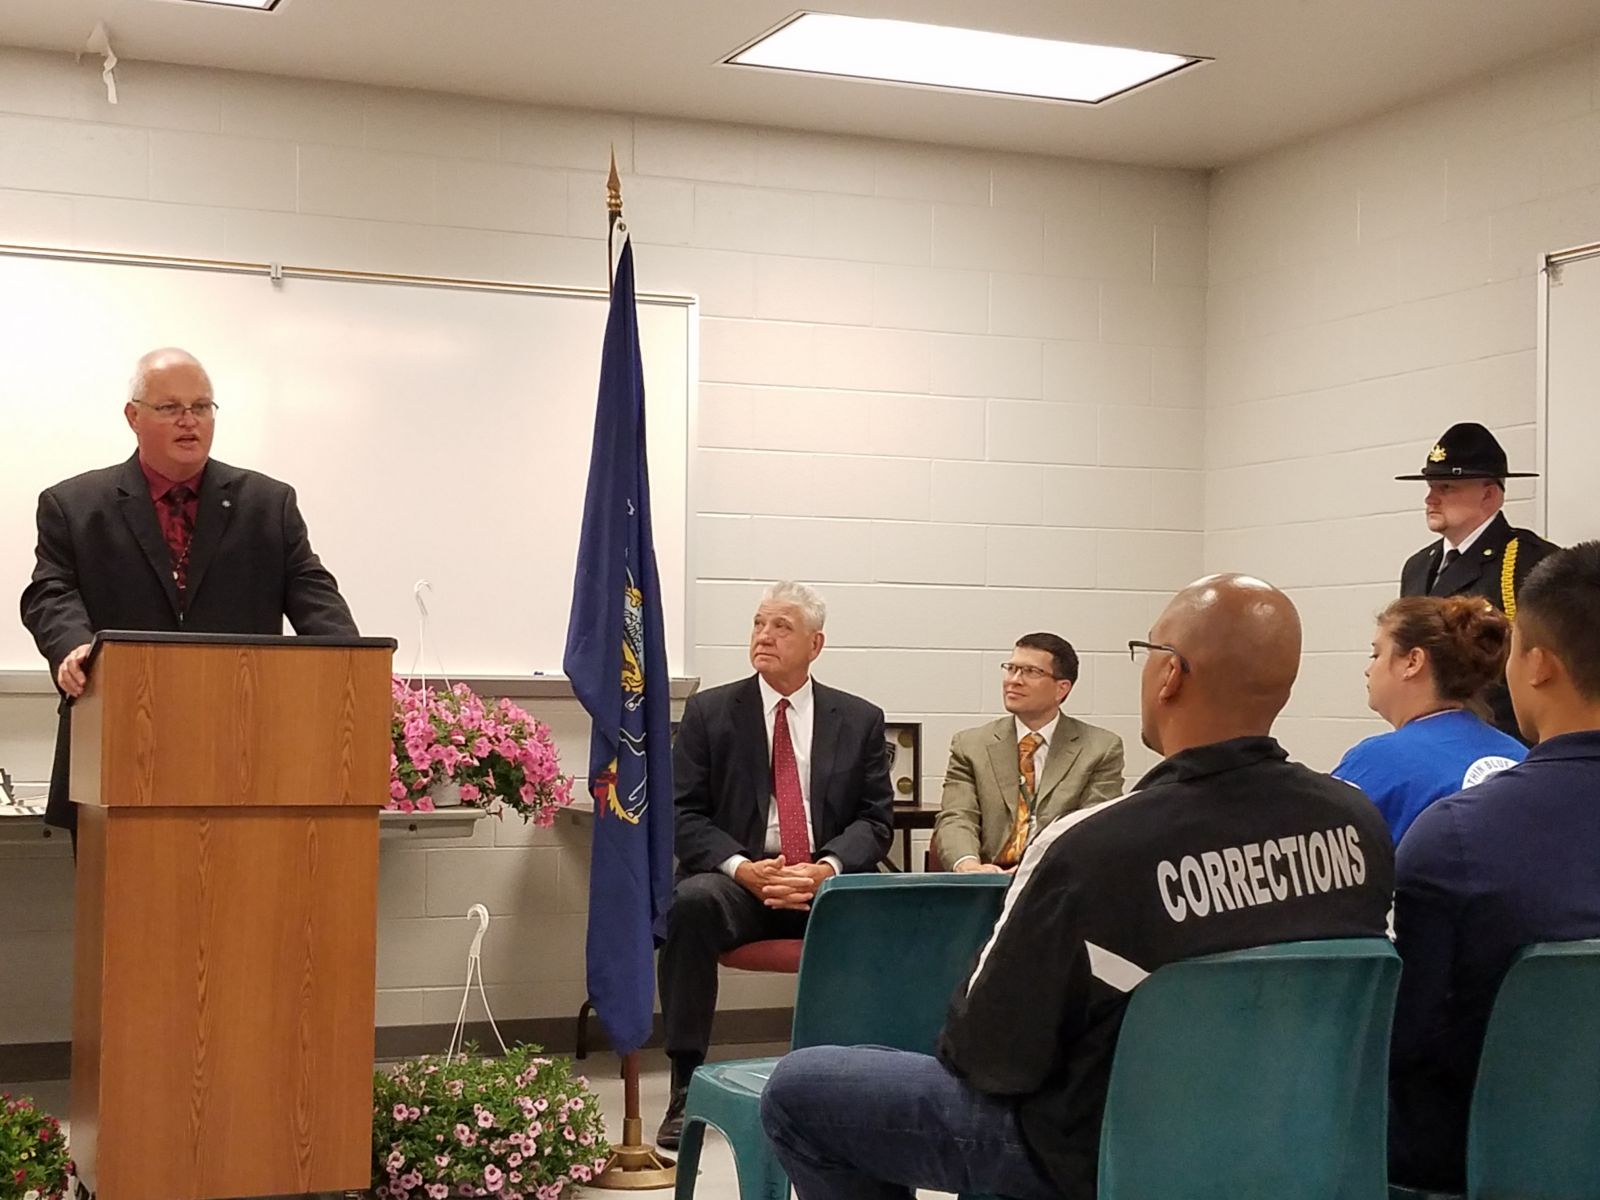 Warden Bill Bechtold addresses Correction officers and employees at the Corrections Officers and Employees Apprecitation Week celebration and service.